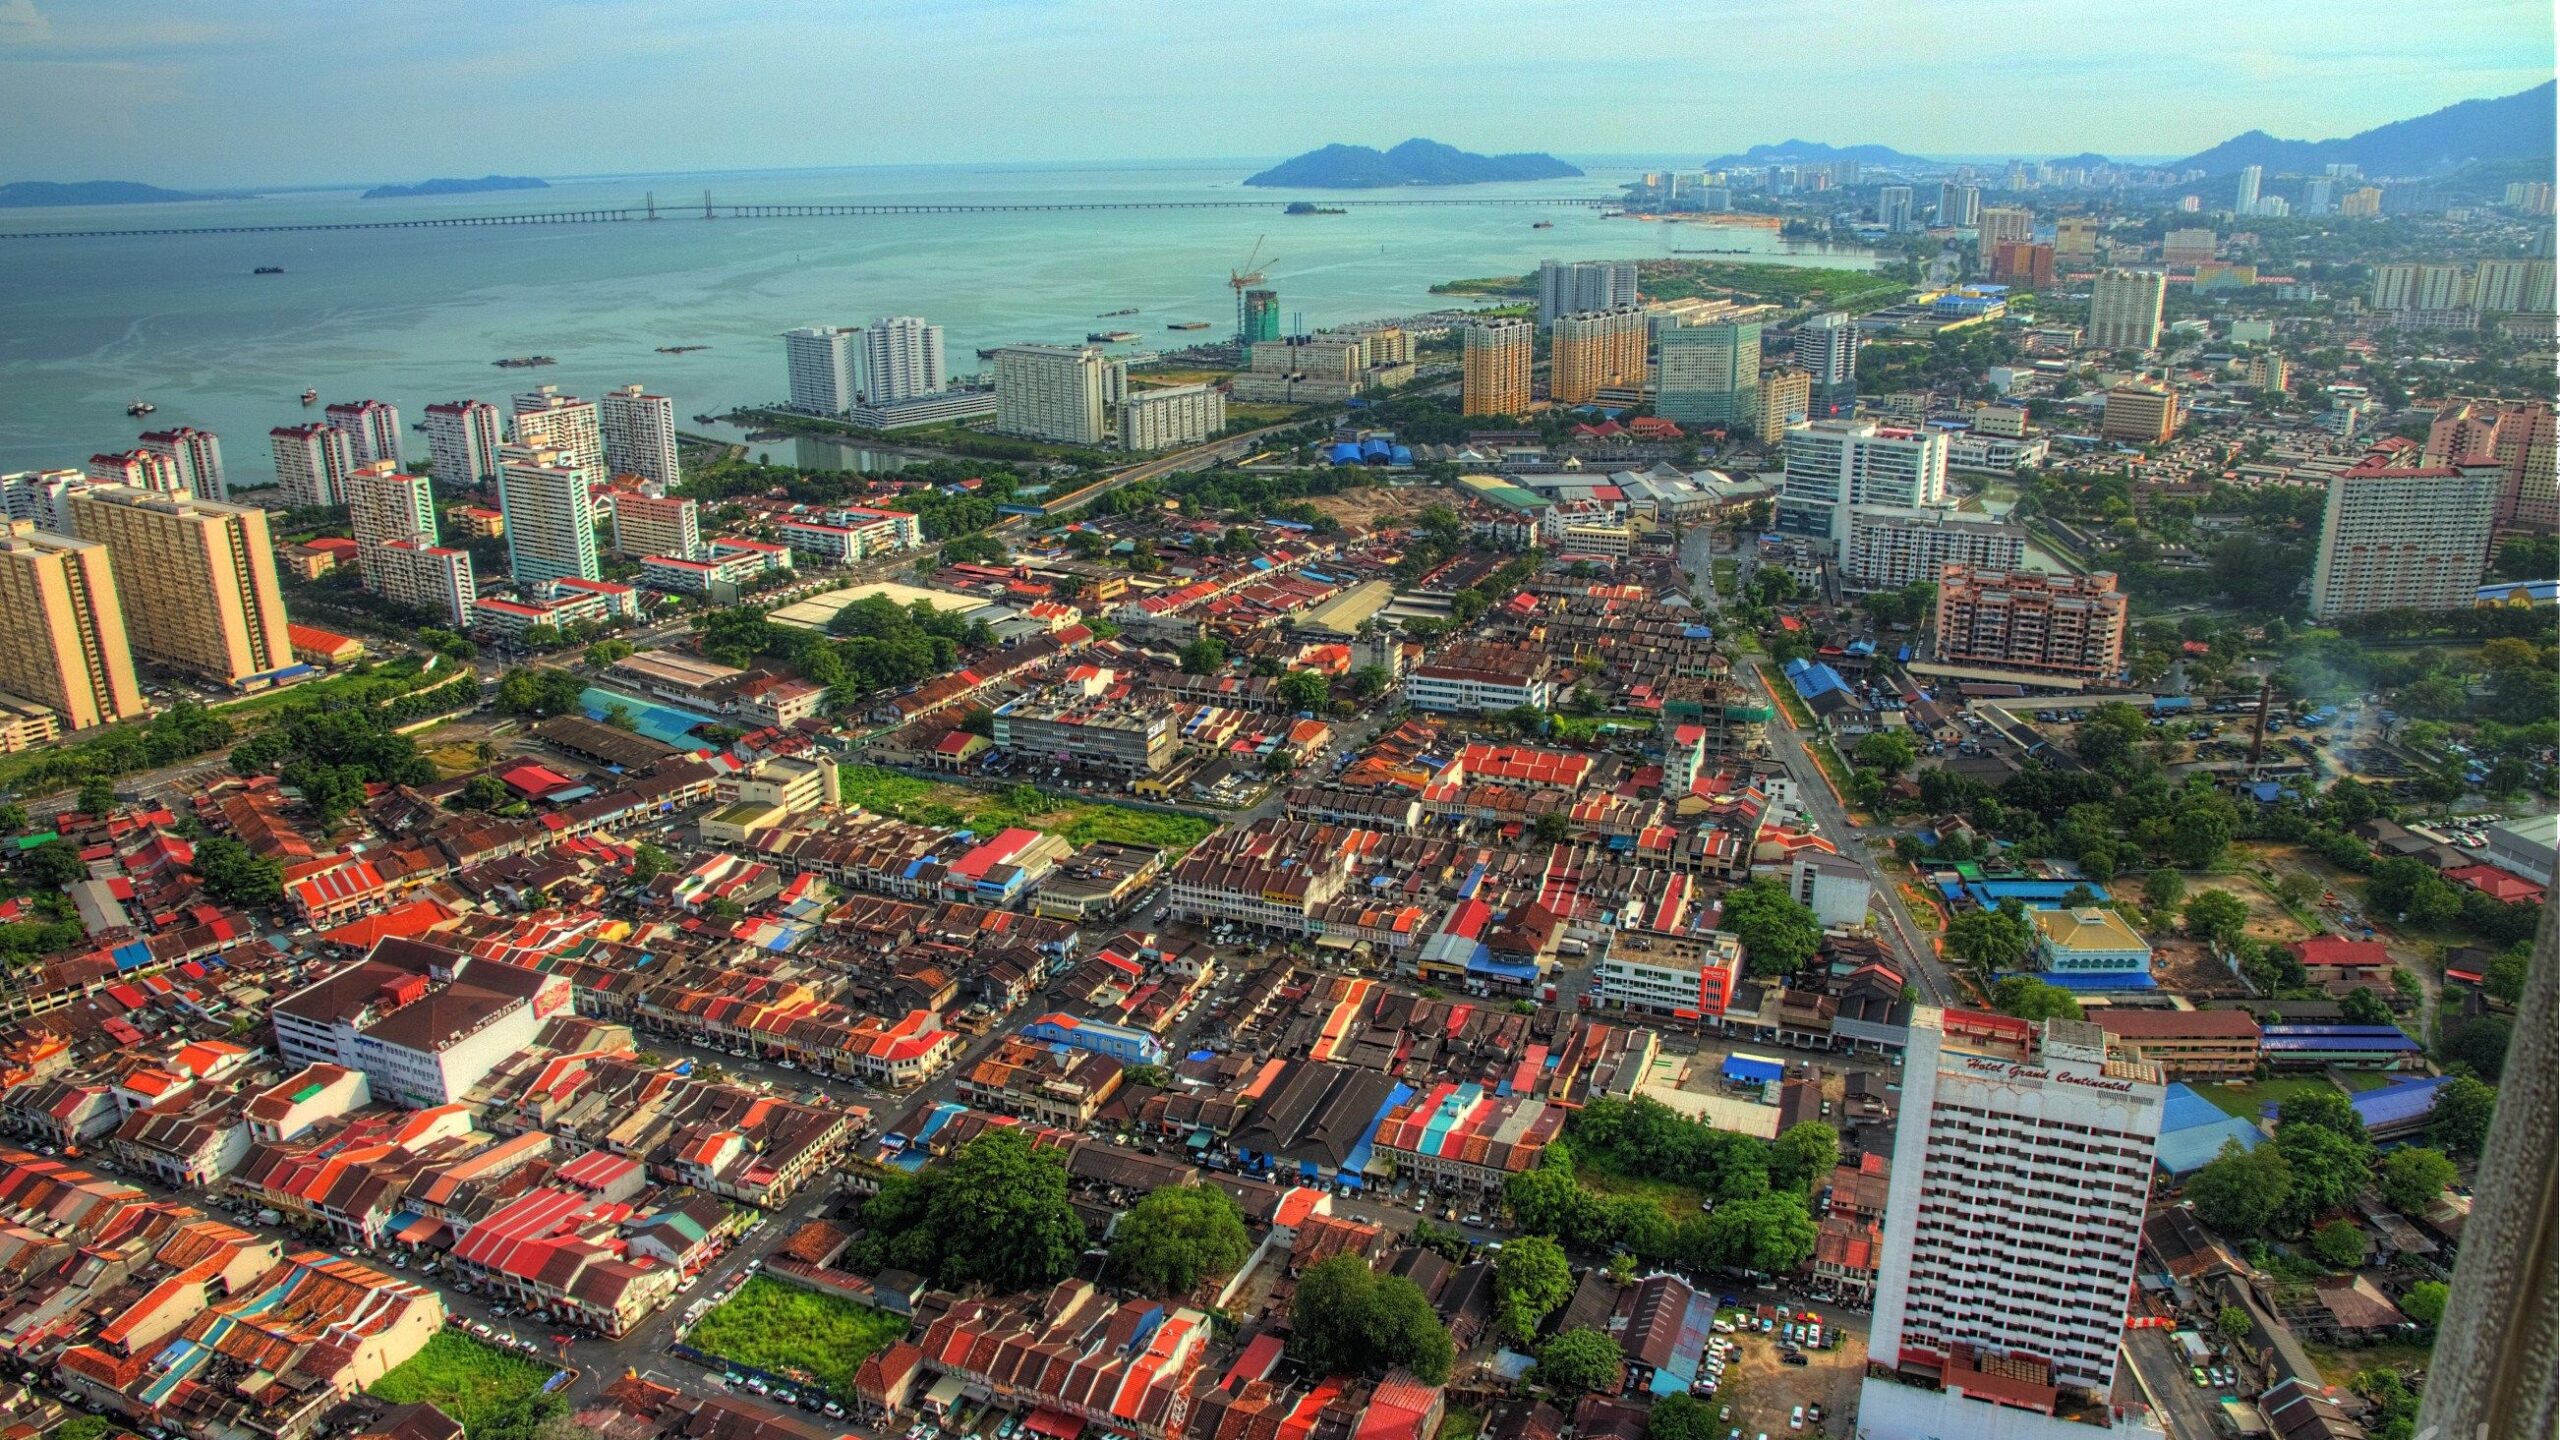 George Town, Malaysia: A UNESCO World Heritage Site with Rich Cultural Diversity